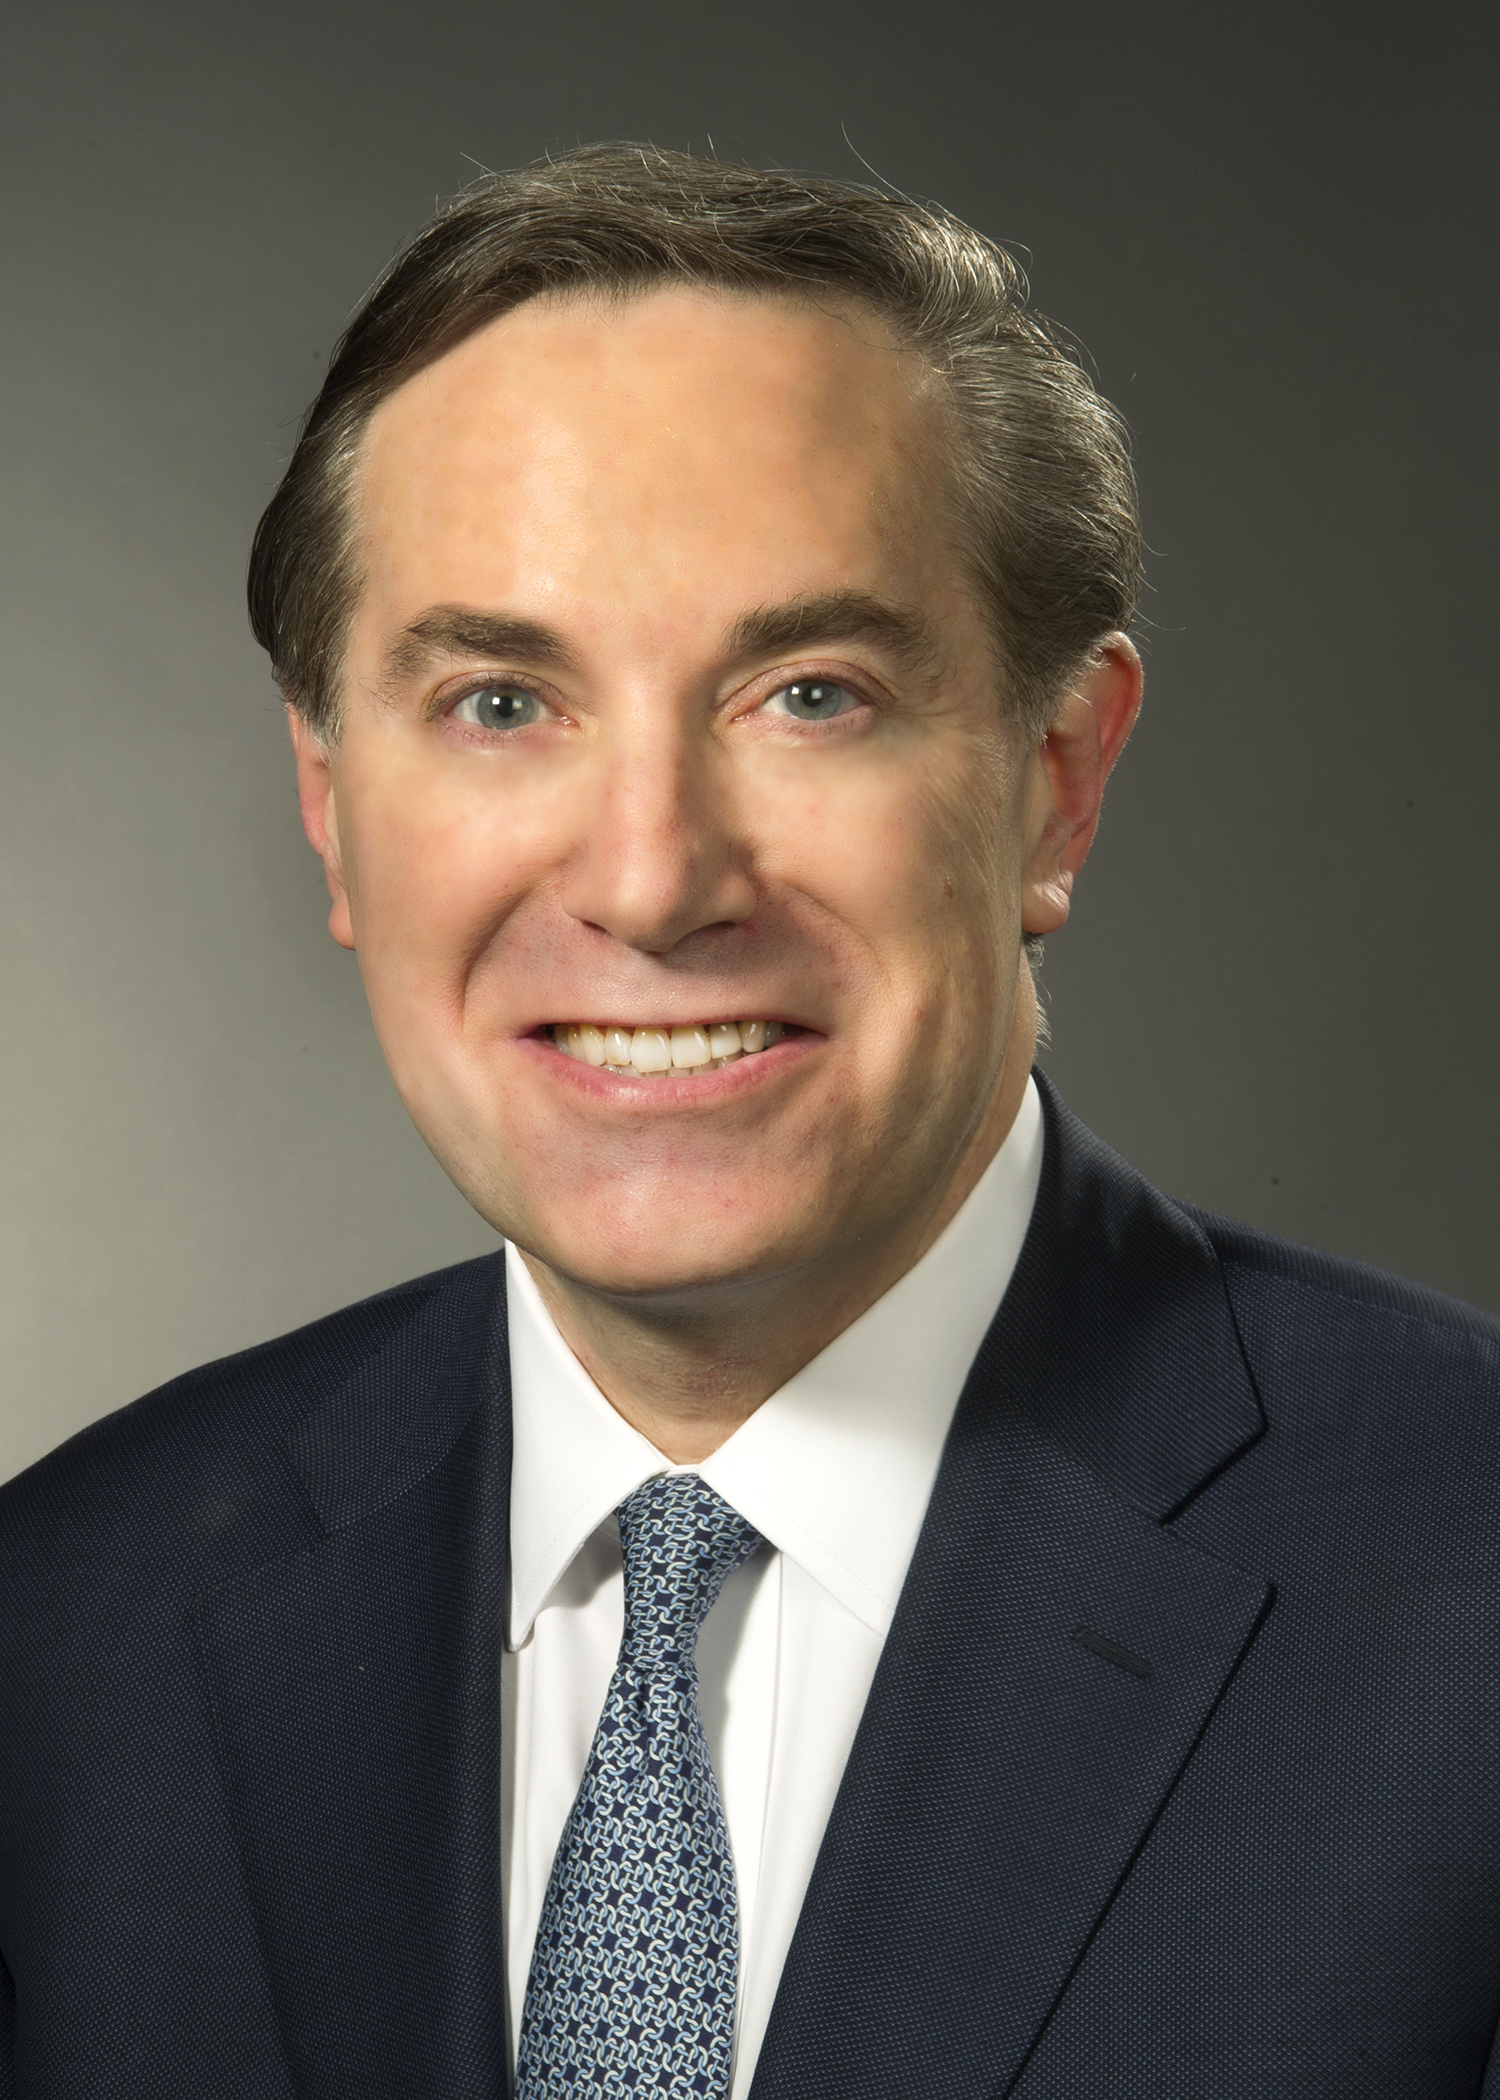 Dr. Lyle Leipziger of Great Neck has been named a top plastic surgeon in several prestigious consumer guides this year. (Photo courtesy of Robin Frank)